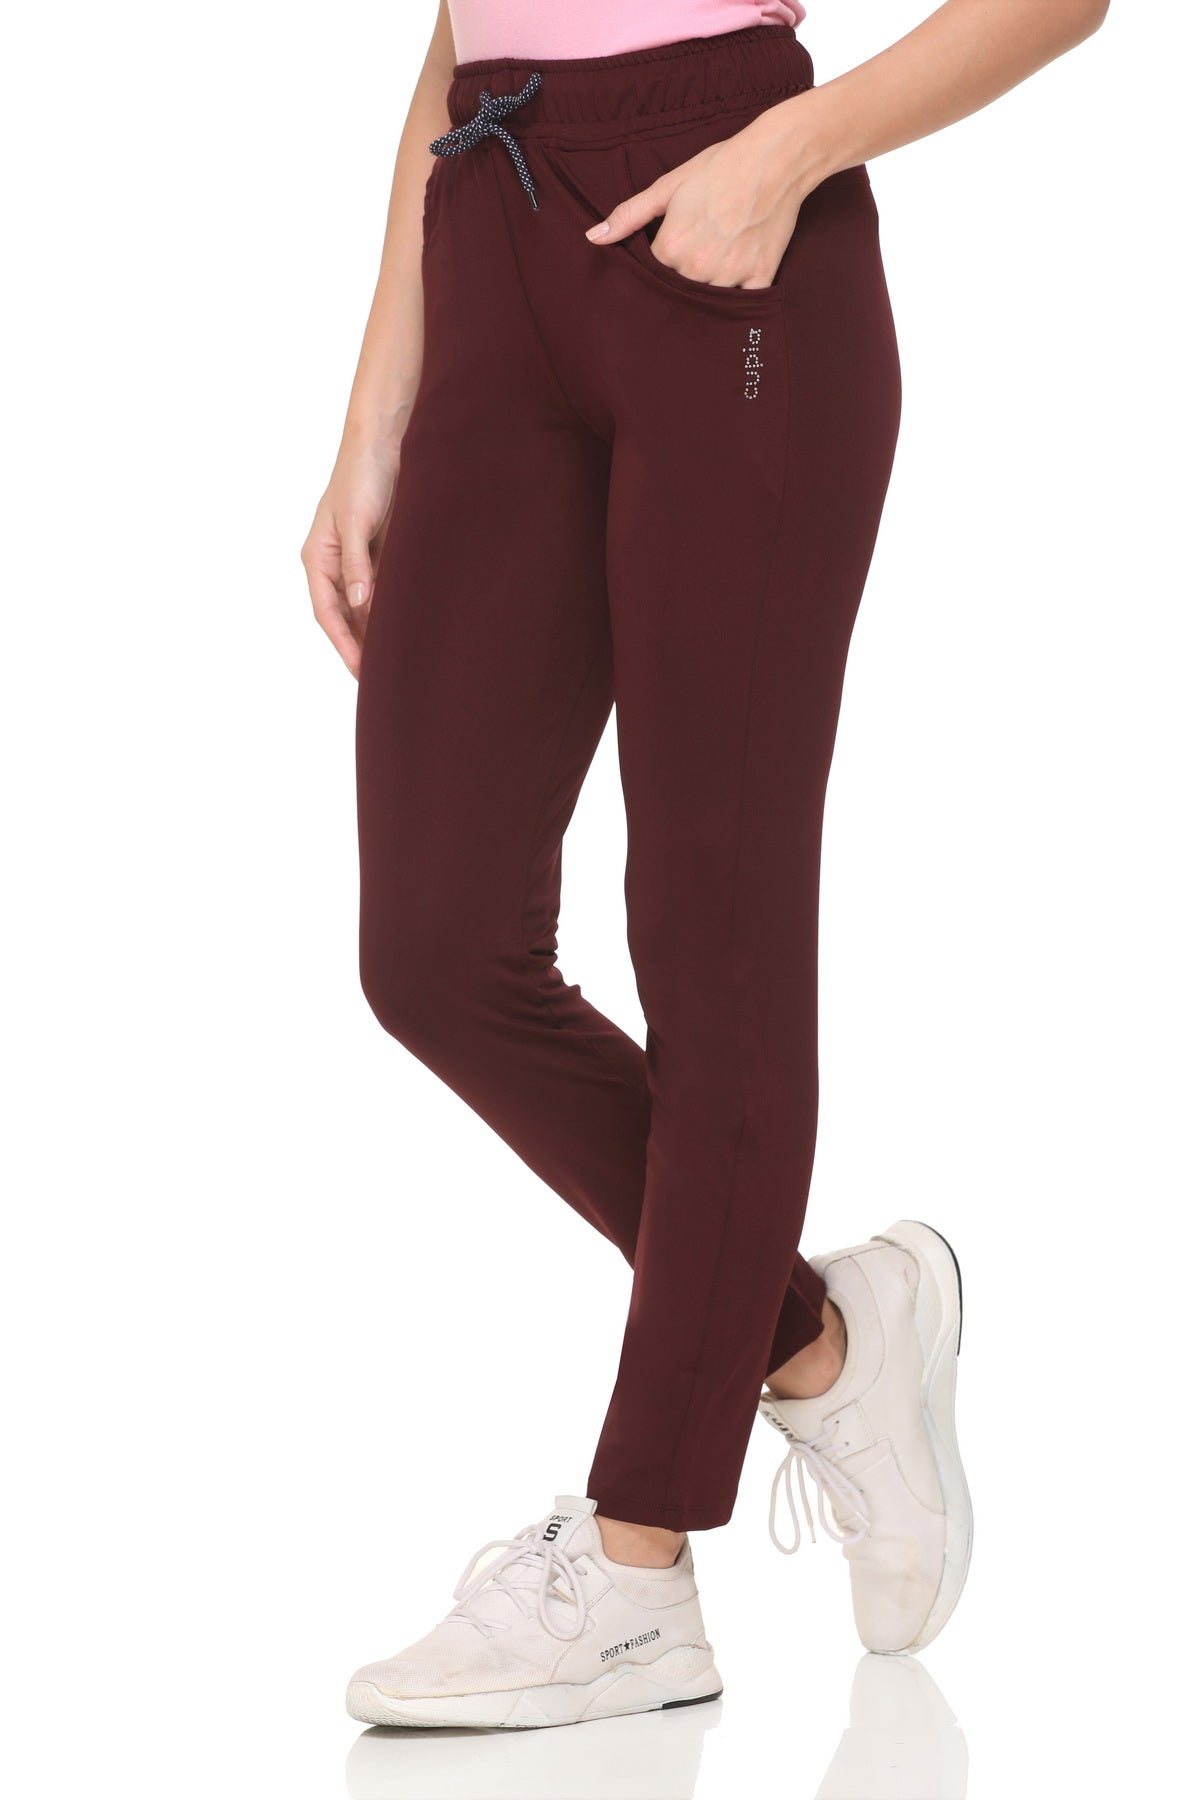 Stretchable Track Pants For Women - Cotton Lycra Activewear - Pack of 2  (Wine & Copper Rust)